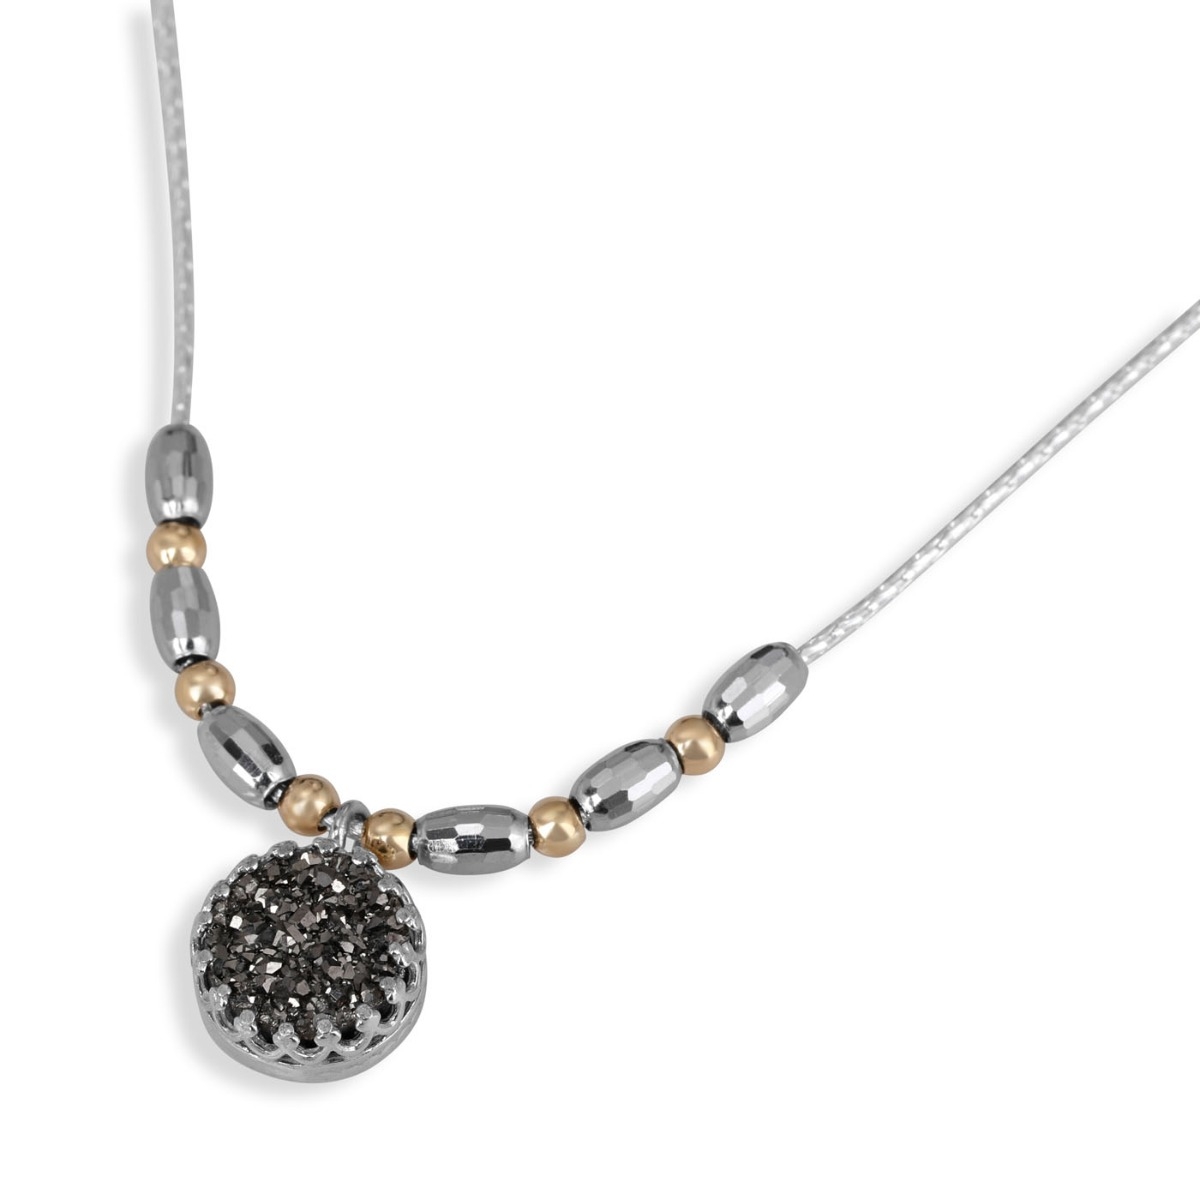 Moriah Jewelry Crown Platinum Druzy Quartz Sterling Silver and Gold Beaded Necklace  - 1